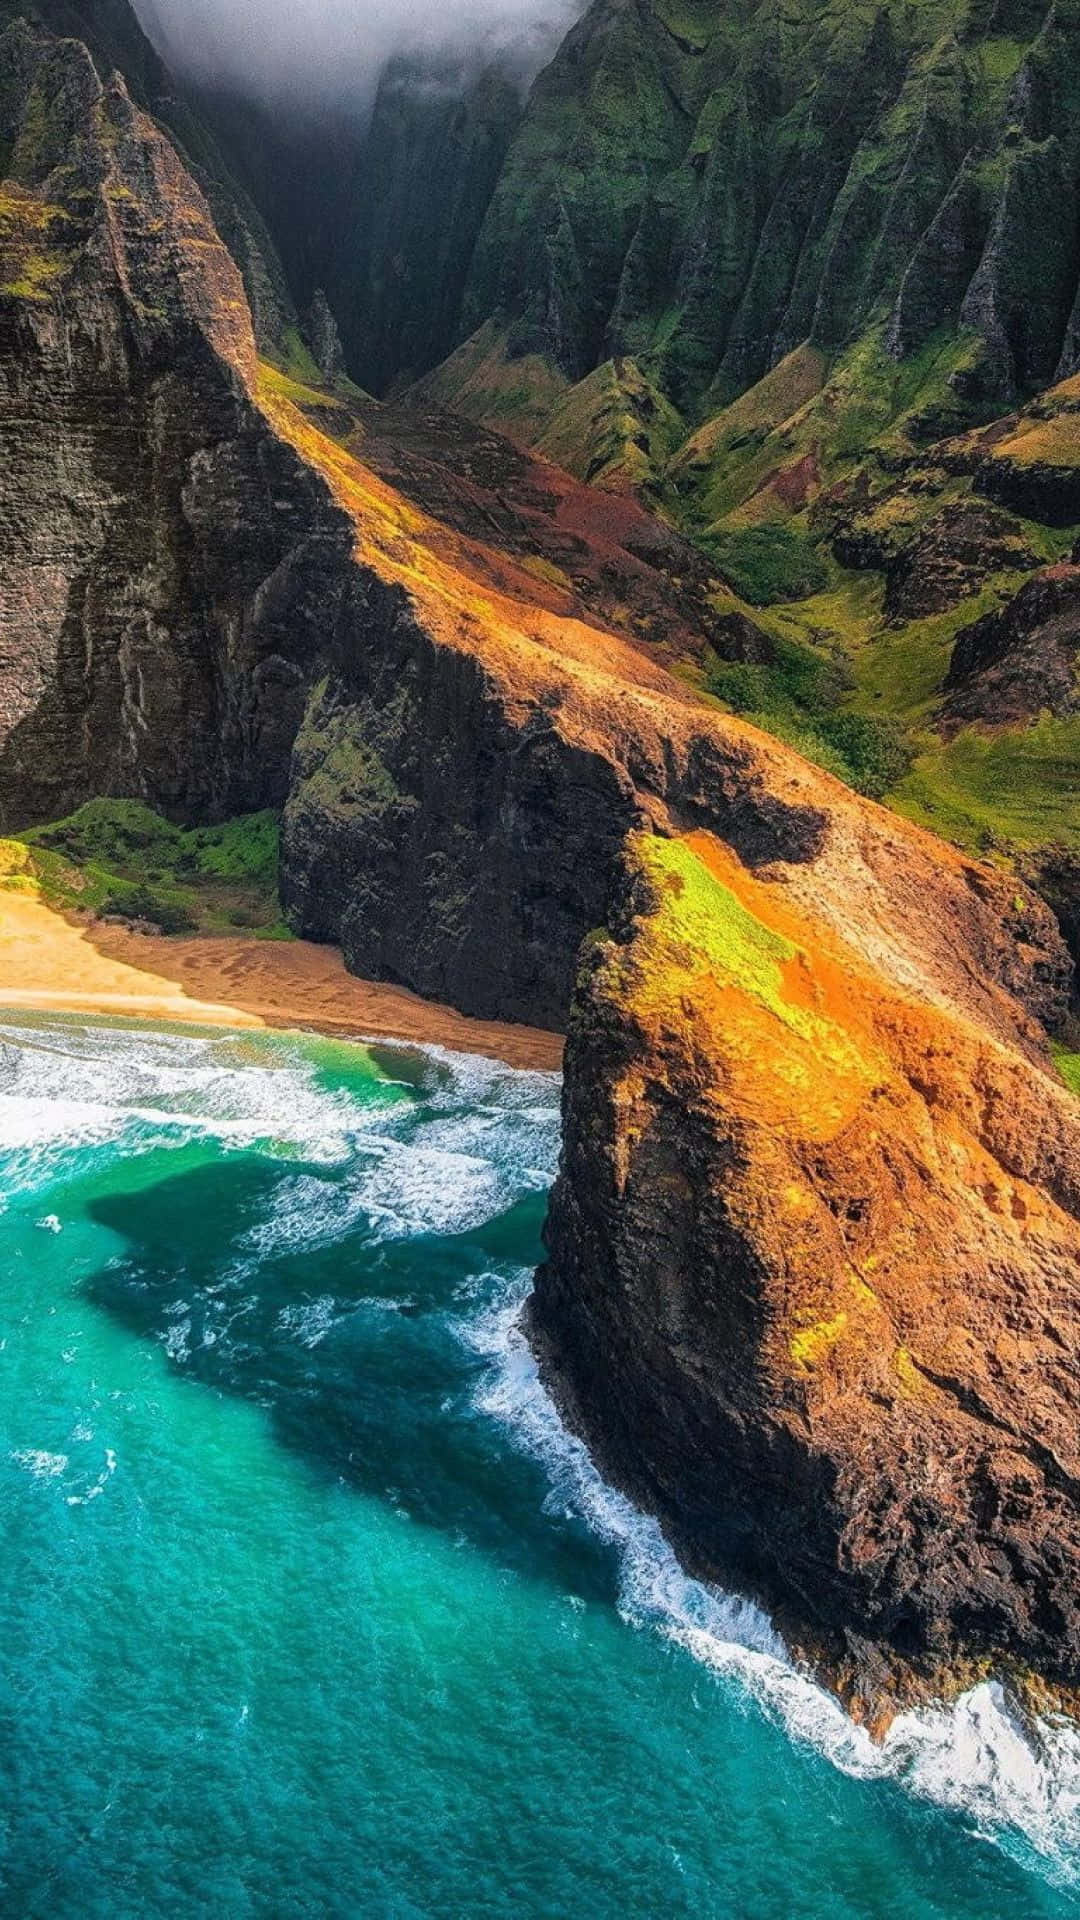 Vacation in Hawaii? Enjoy it even more with this view. Wallpaper